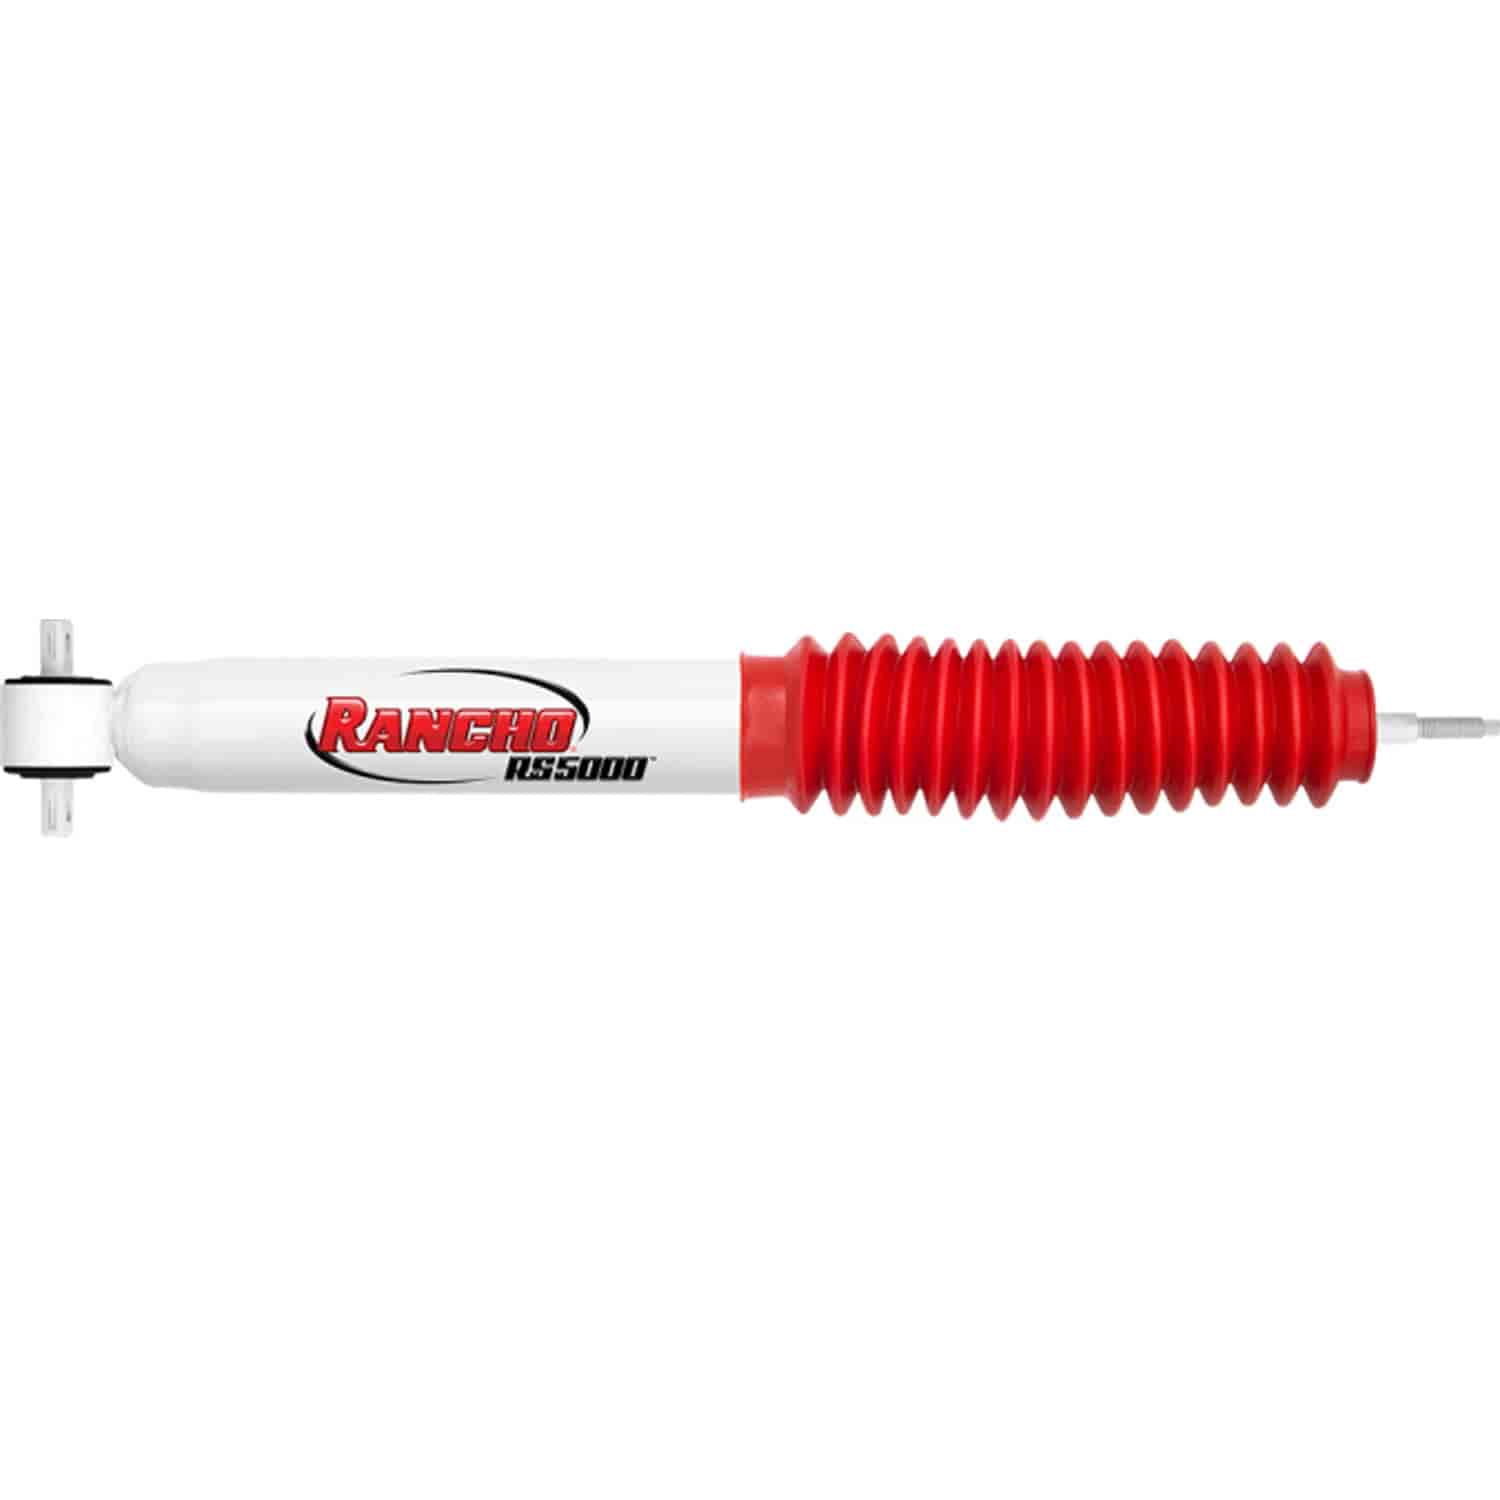 RS5000 Front Shock Absorber Fits Dodge D-Series Pickup and Ram Van